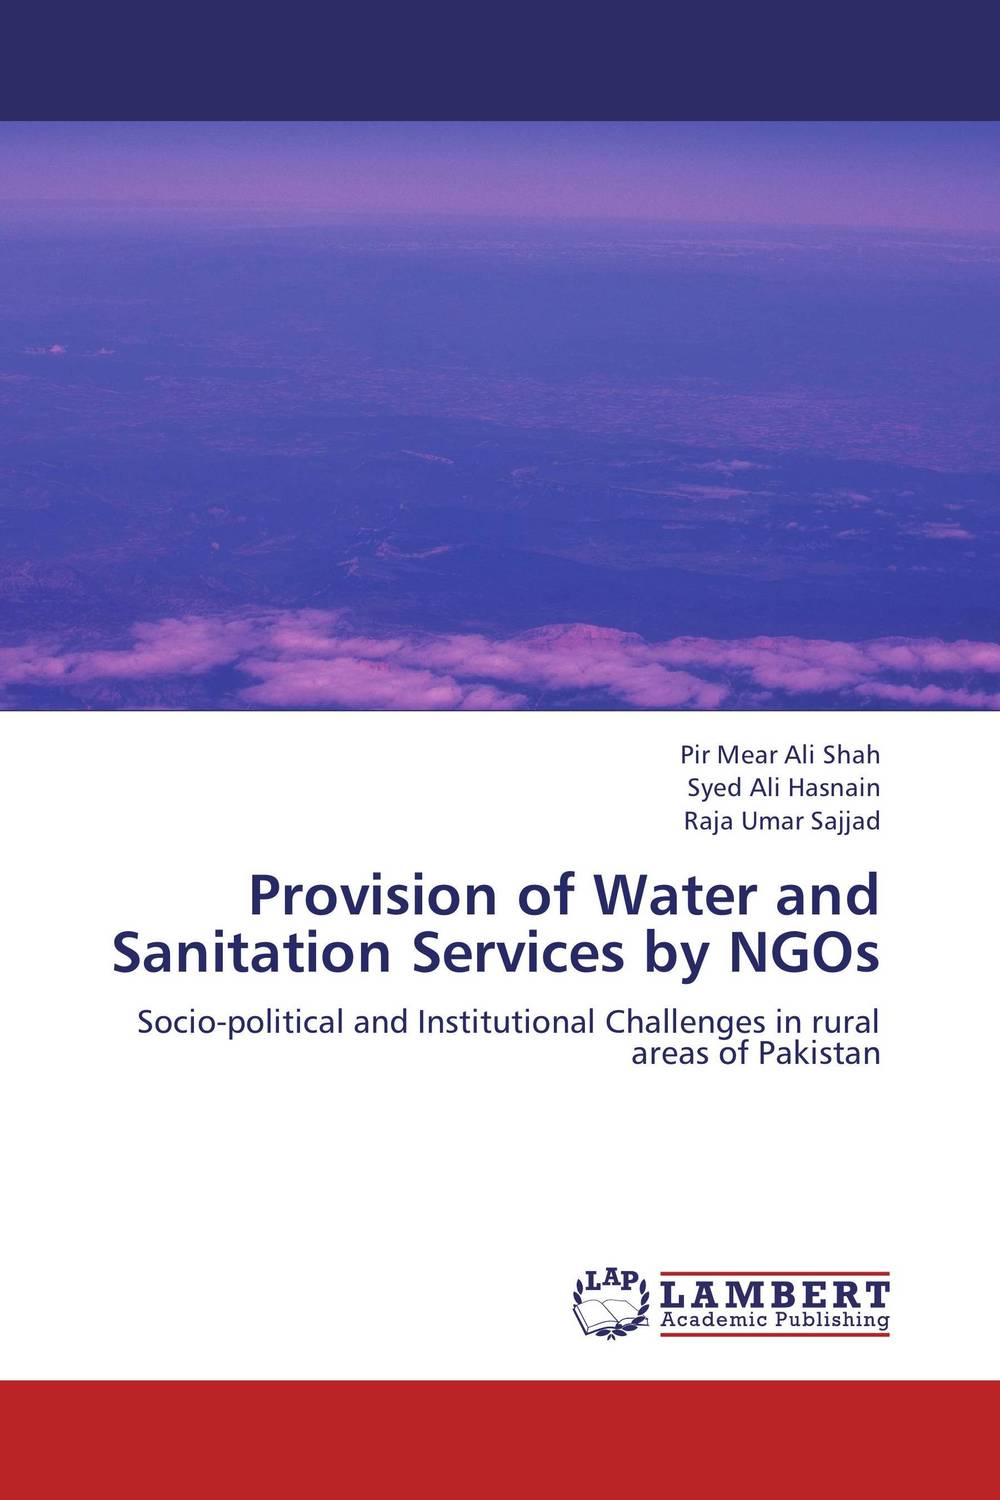 Provision of Water and Sanitation Services by NGOs